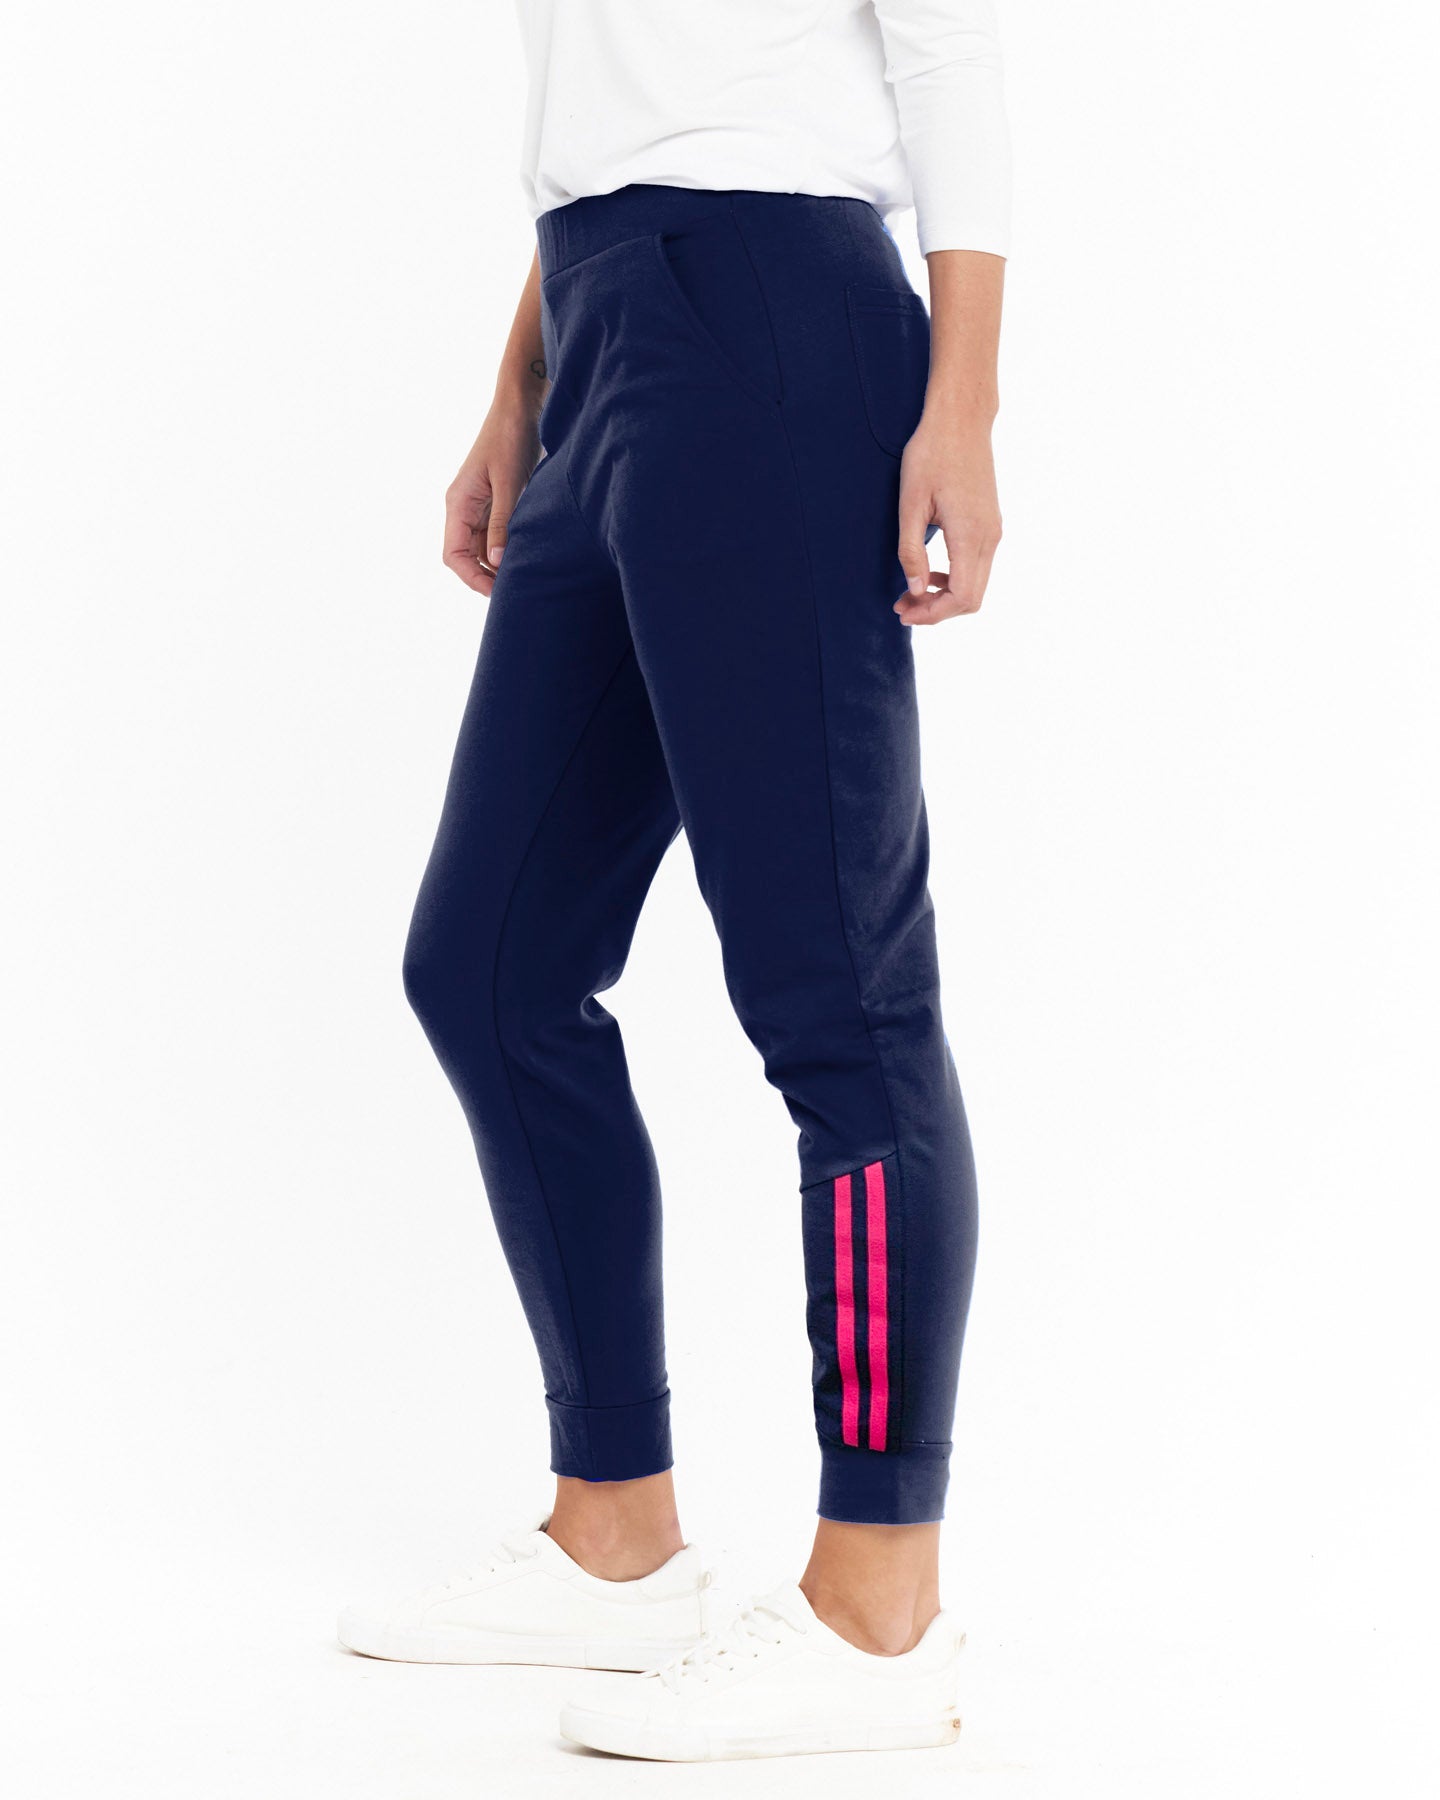 Queens midnight jogger bottoms with ruby pink racer stripes on bottom of leg